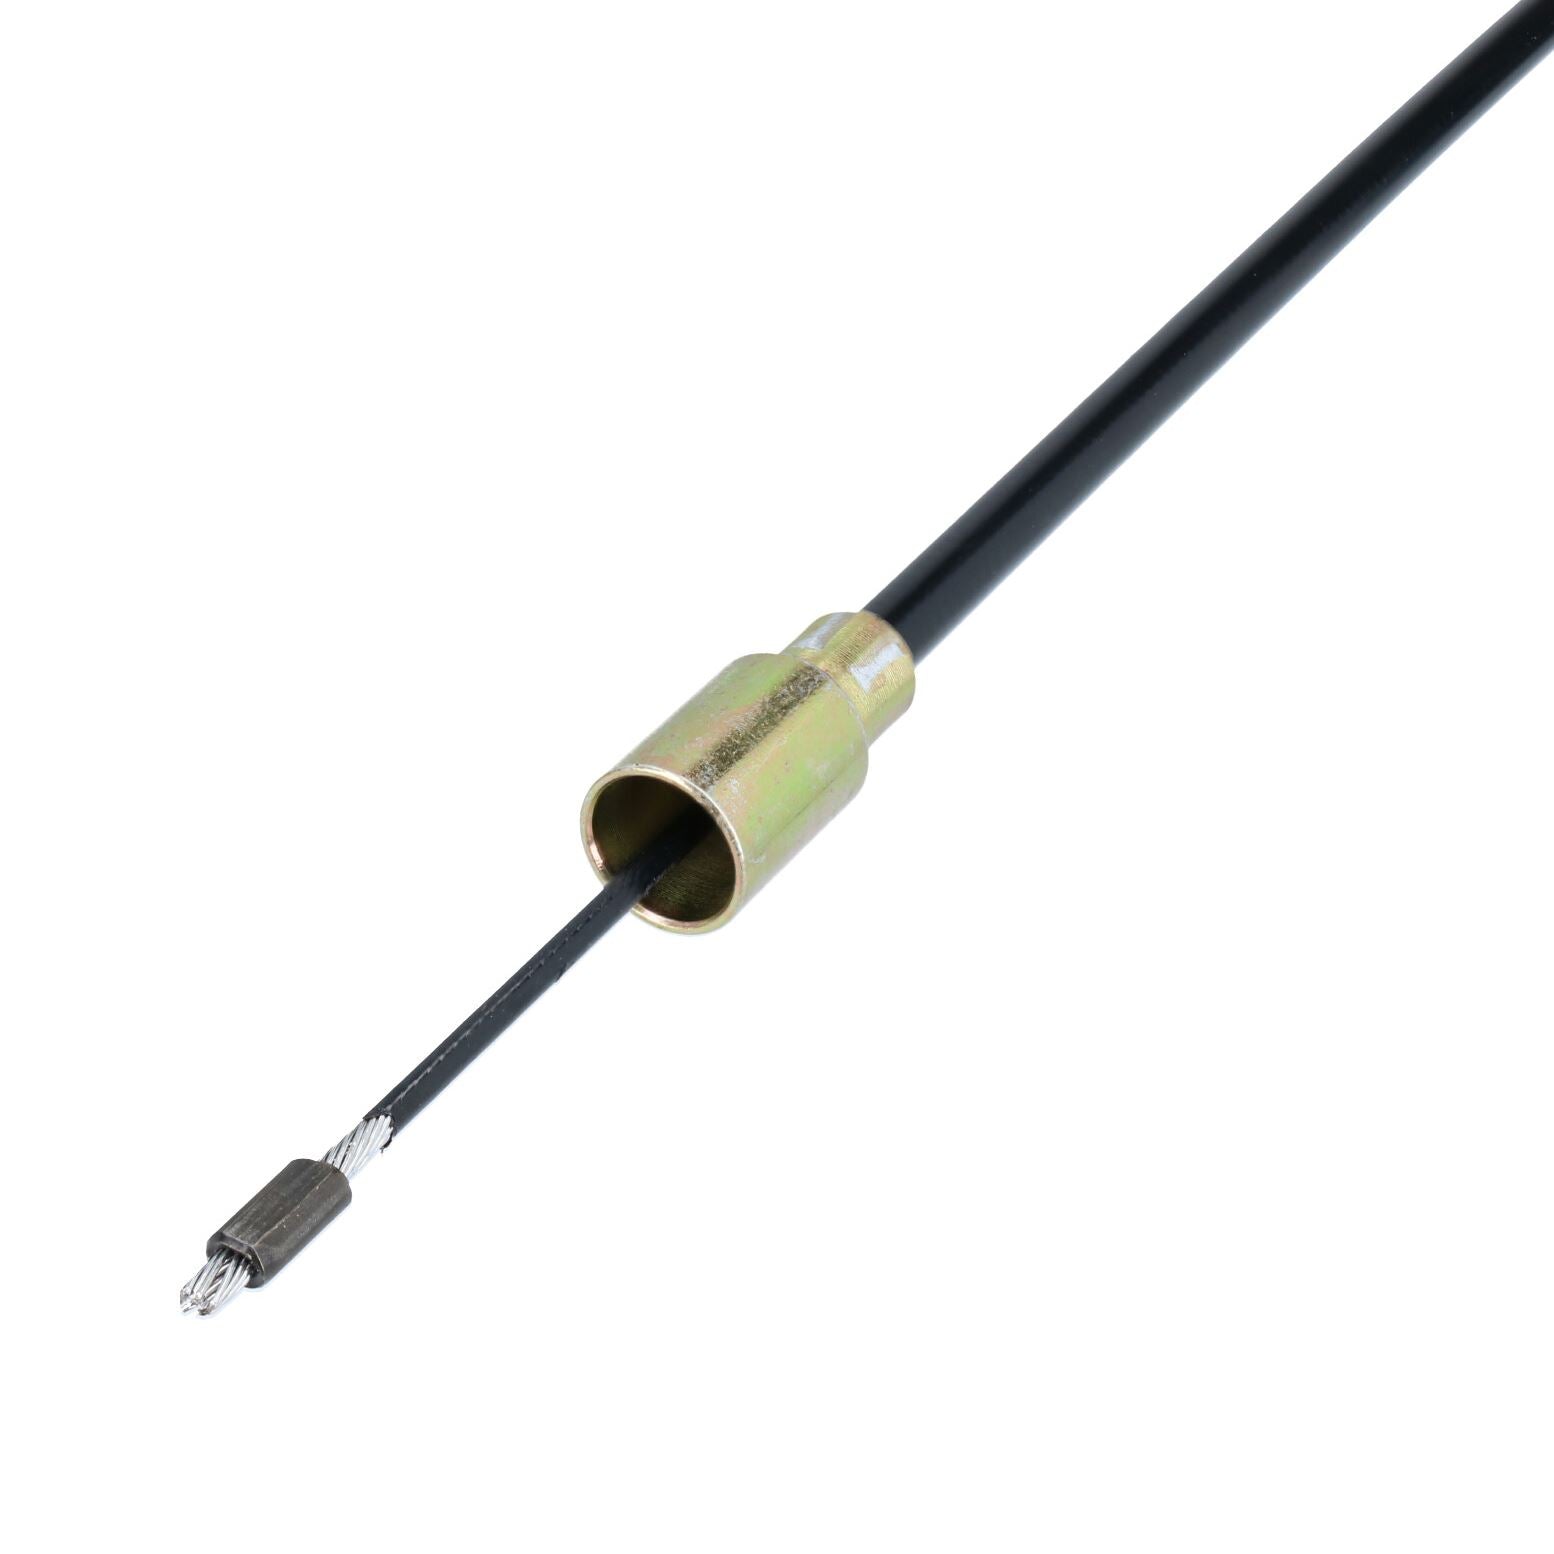 Long Life Trailer Brake Cable For Knott Systems for Ifor Williams 730mm - 1730mm